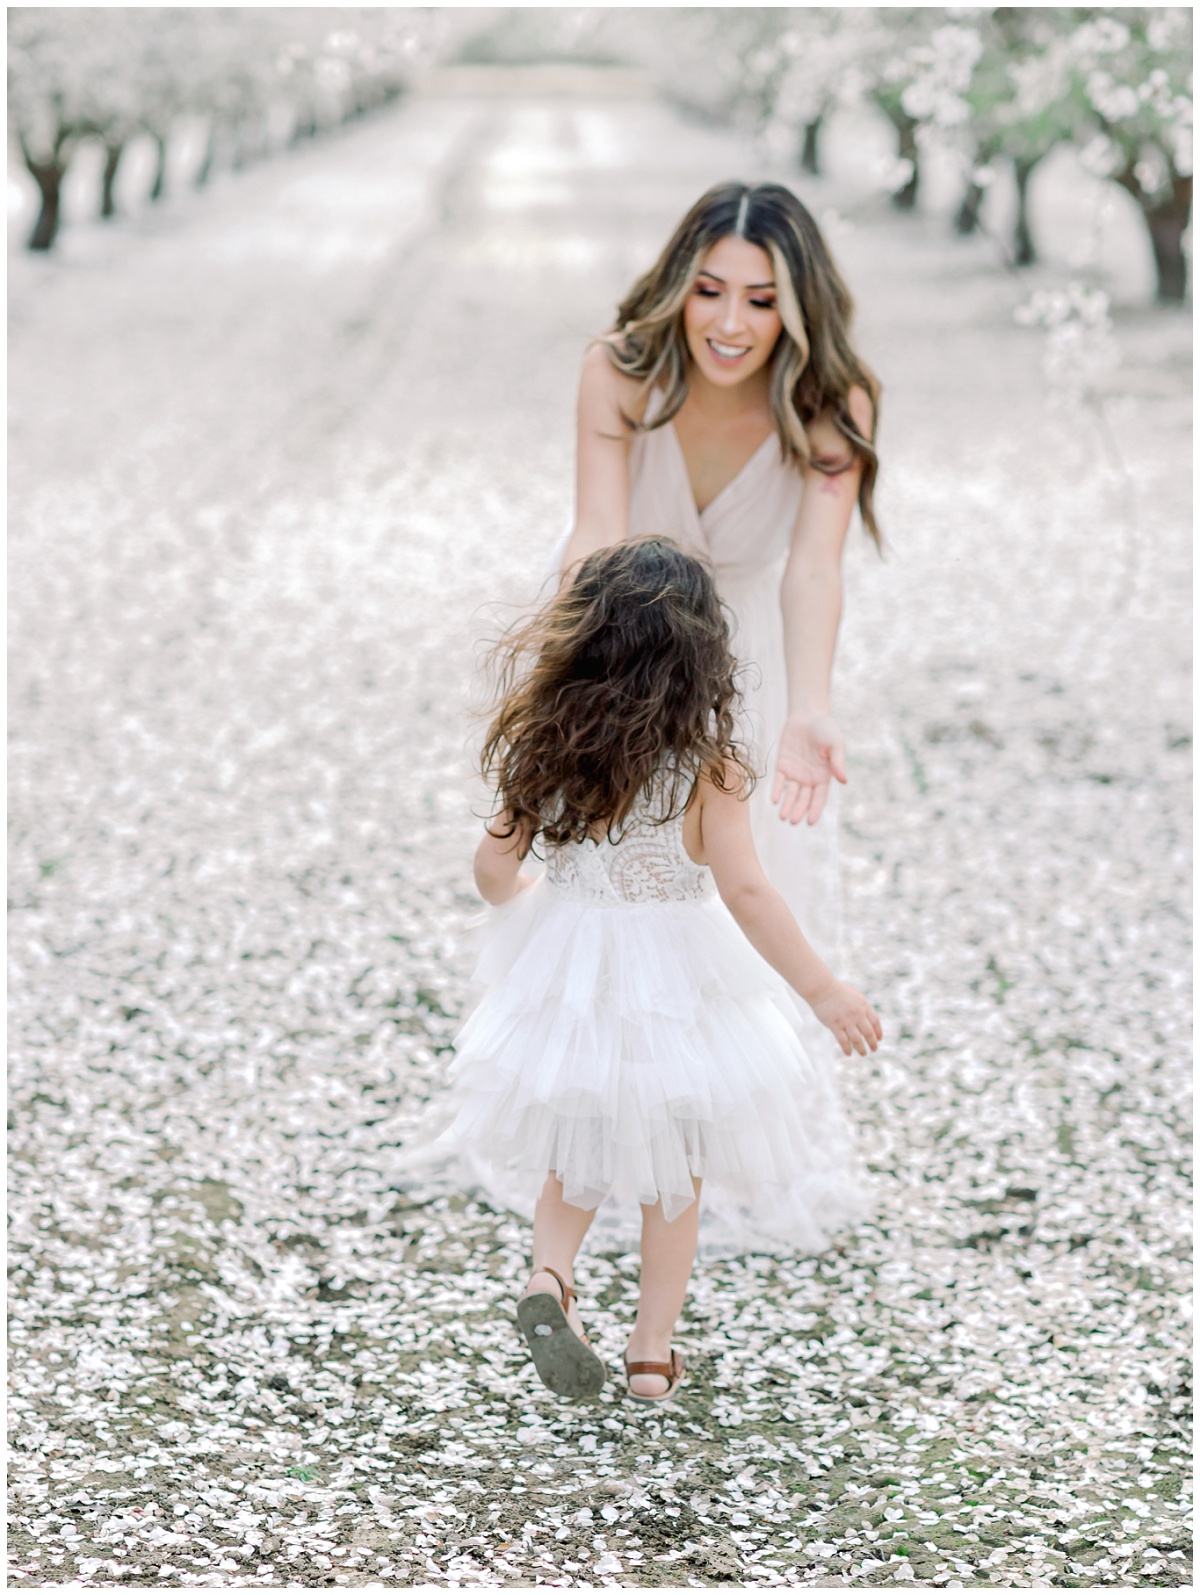 Almond Blossom Orchard Family Photos